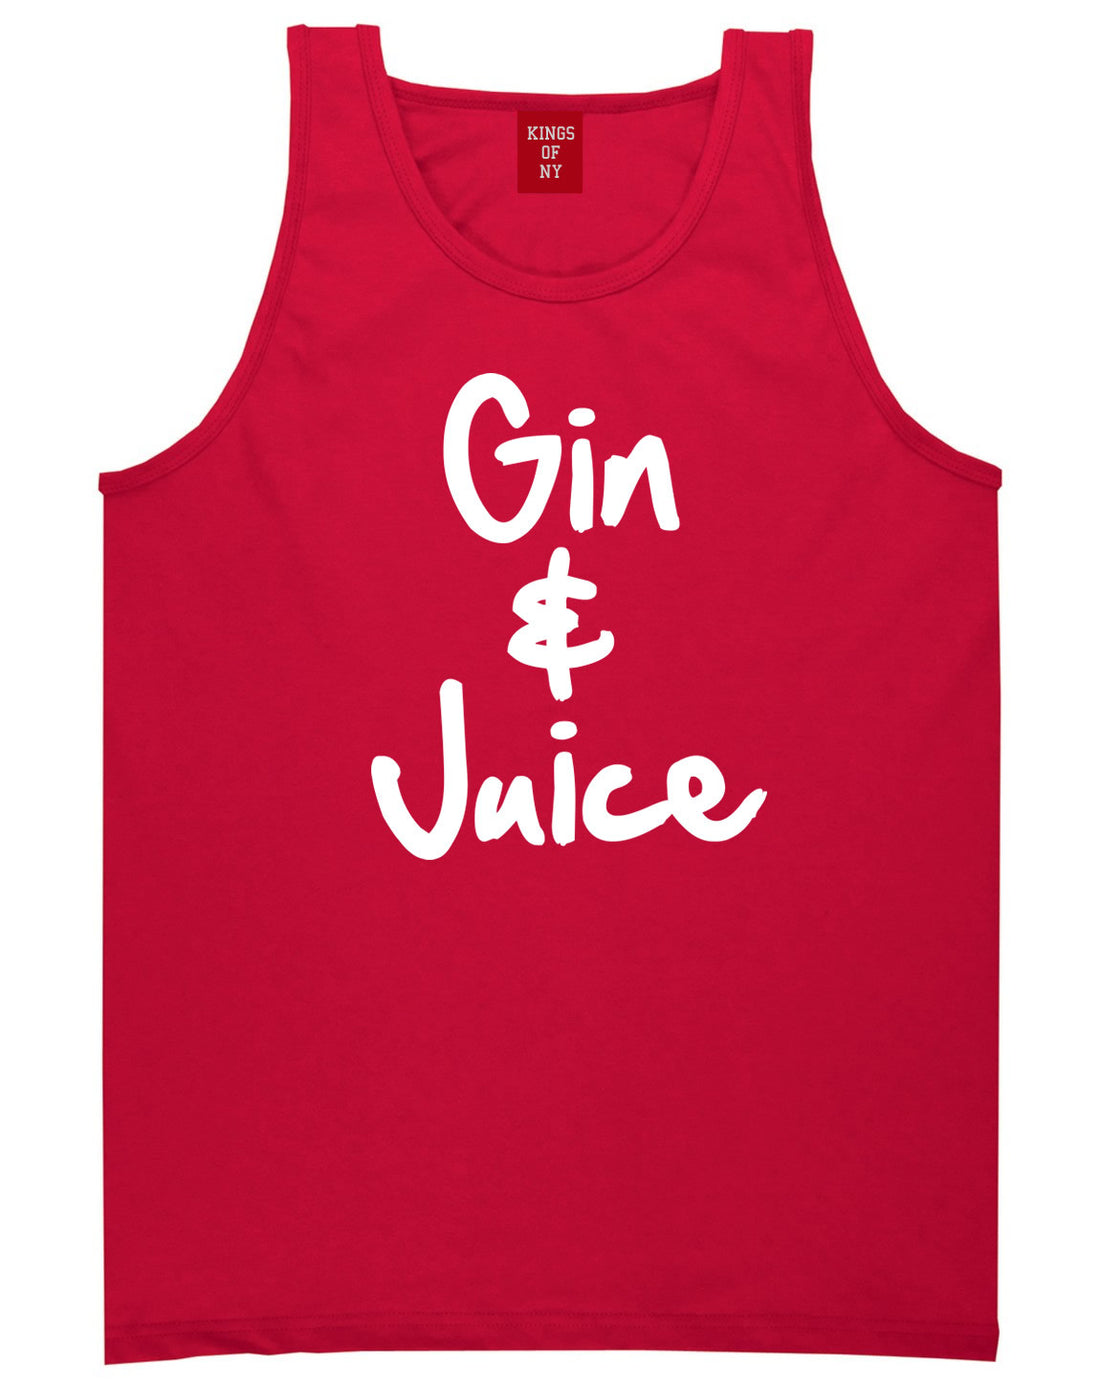 Kings Of NY Gin and Juice Tank Top in Red